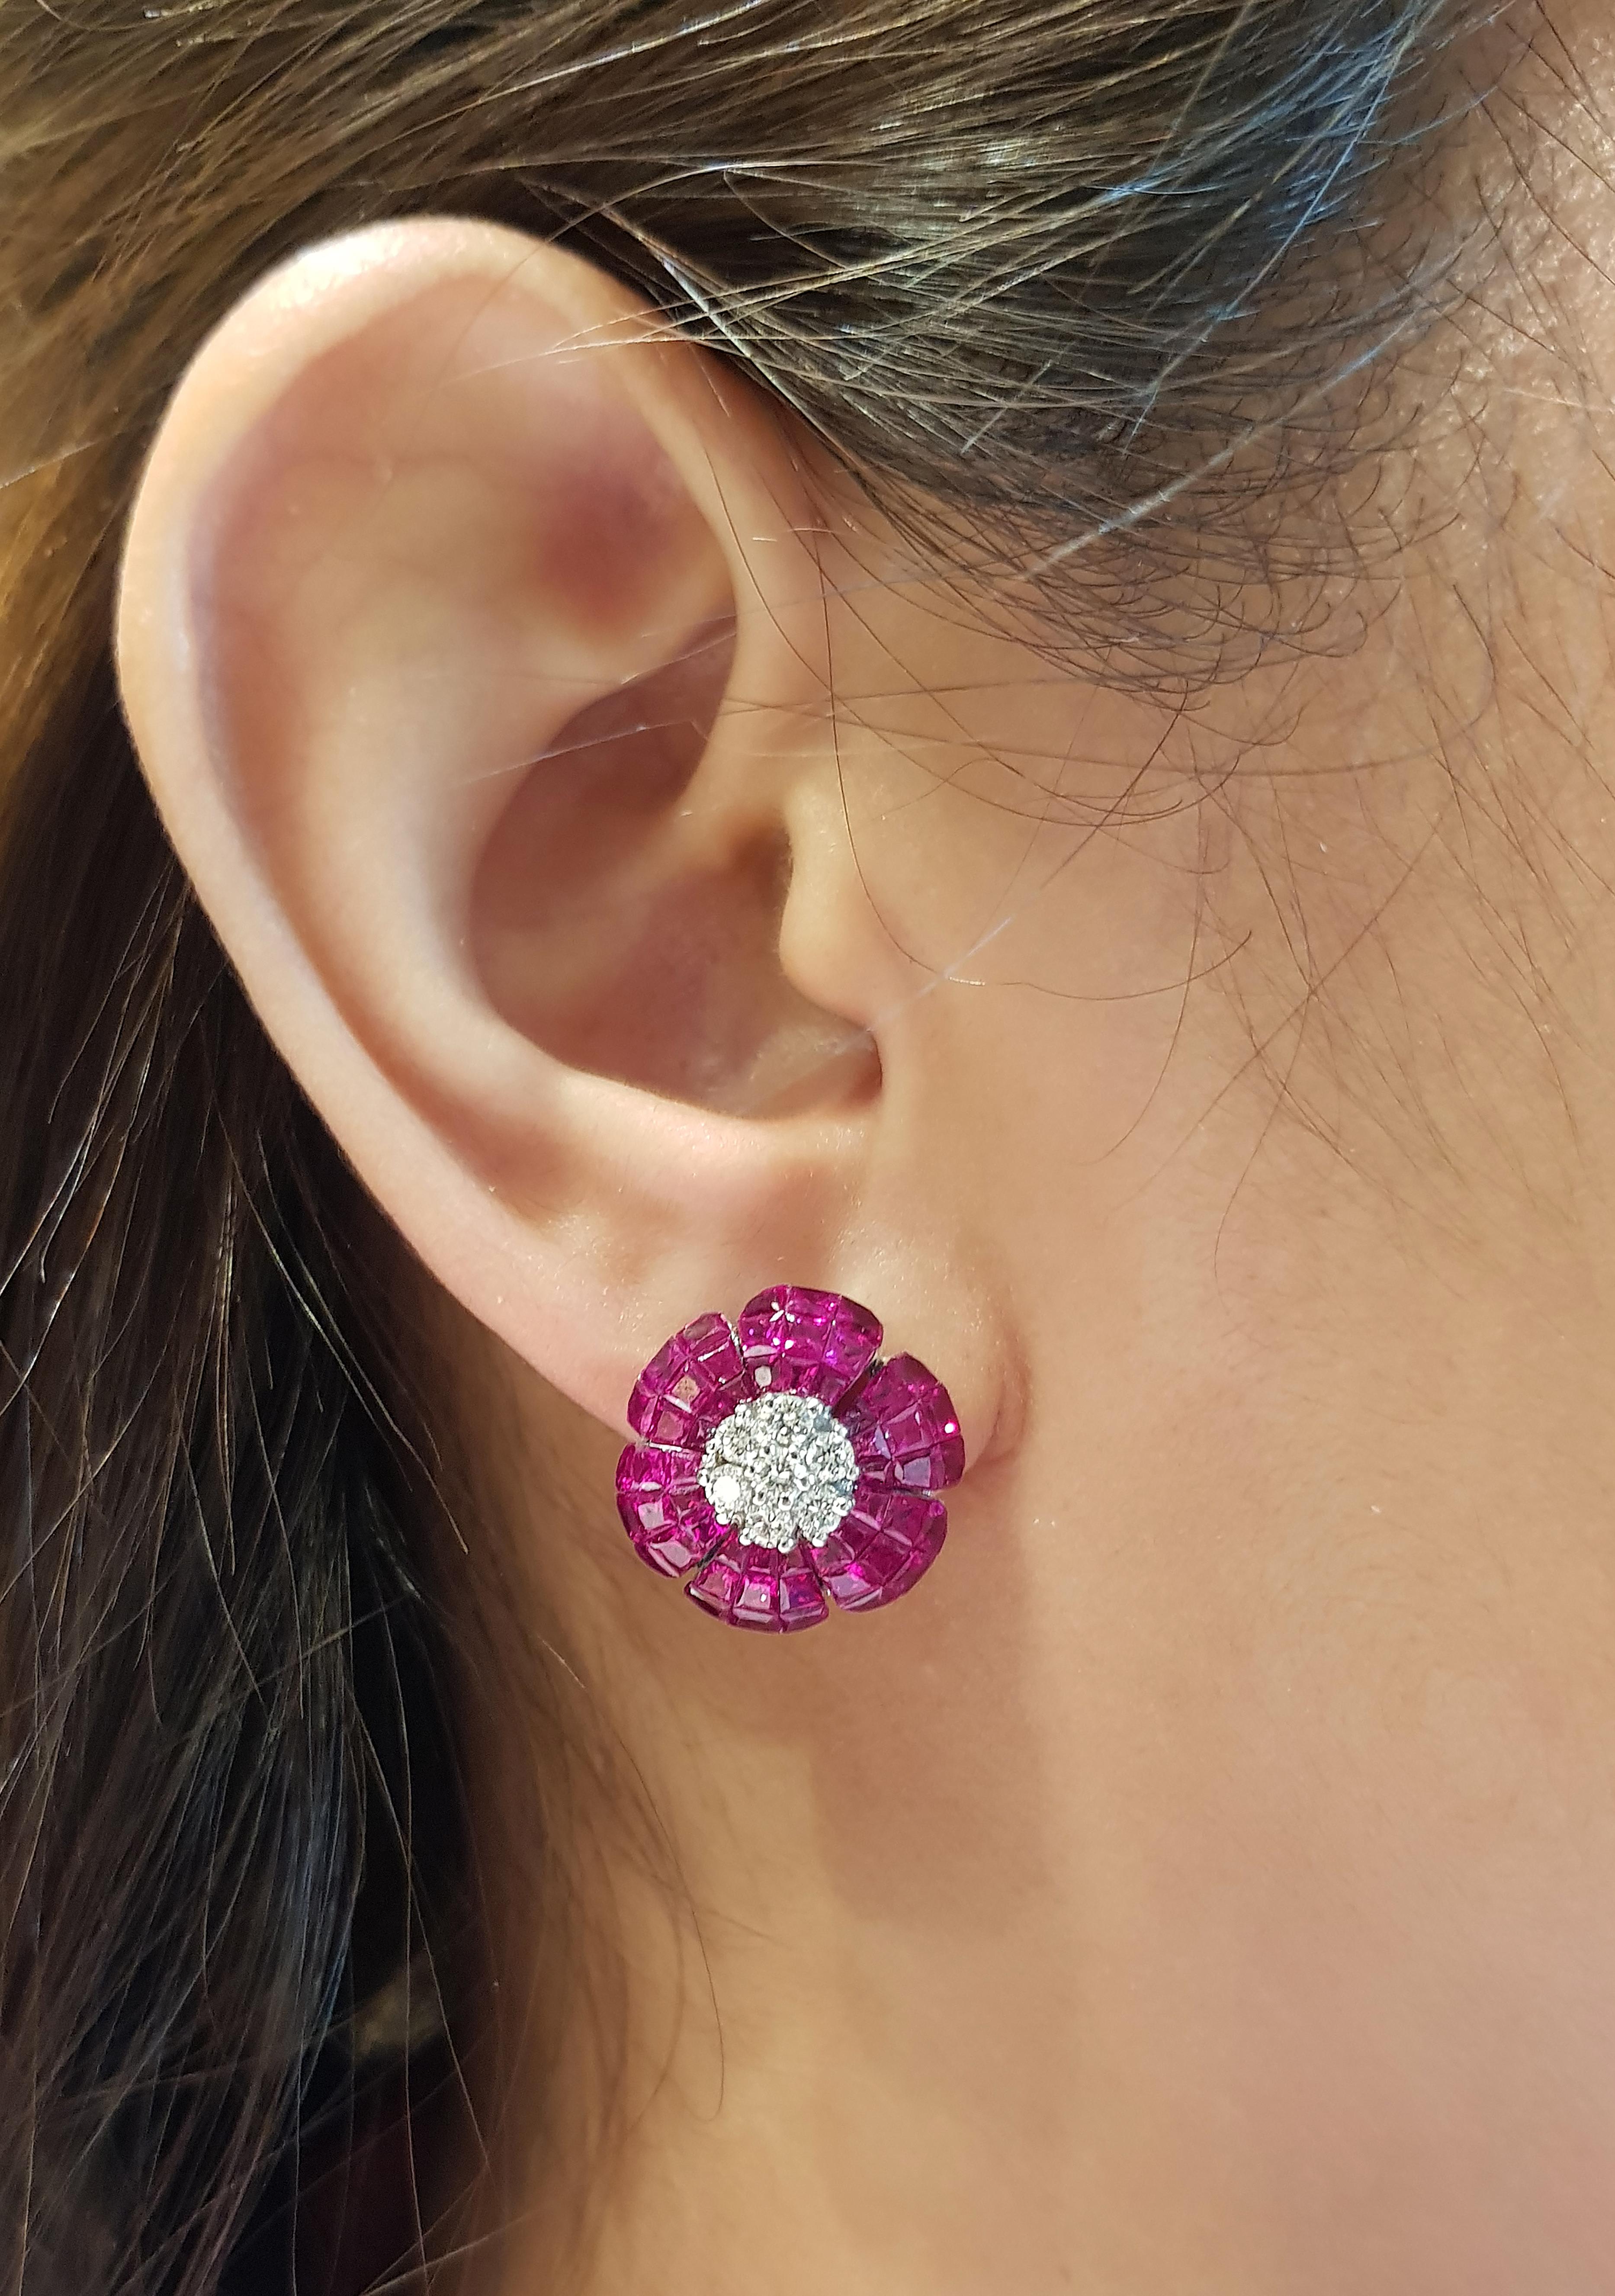 Ruby 13.60 carats with Diamond 0.60 carat Earrings set in 18 Karat White Gold Settings

Width:  1.6 cm 
Length: 1.6 cm
Total Weight: 12.32 grams

